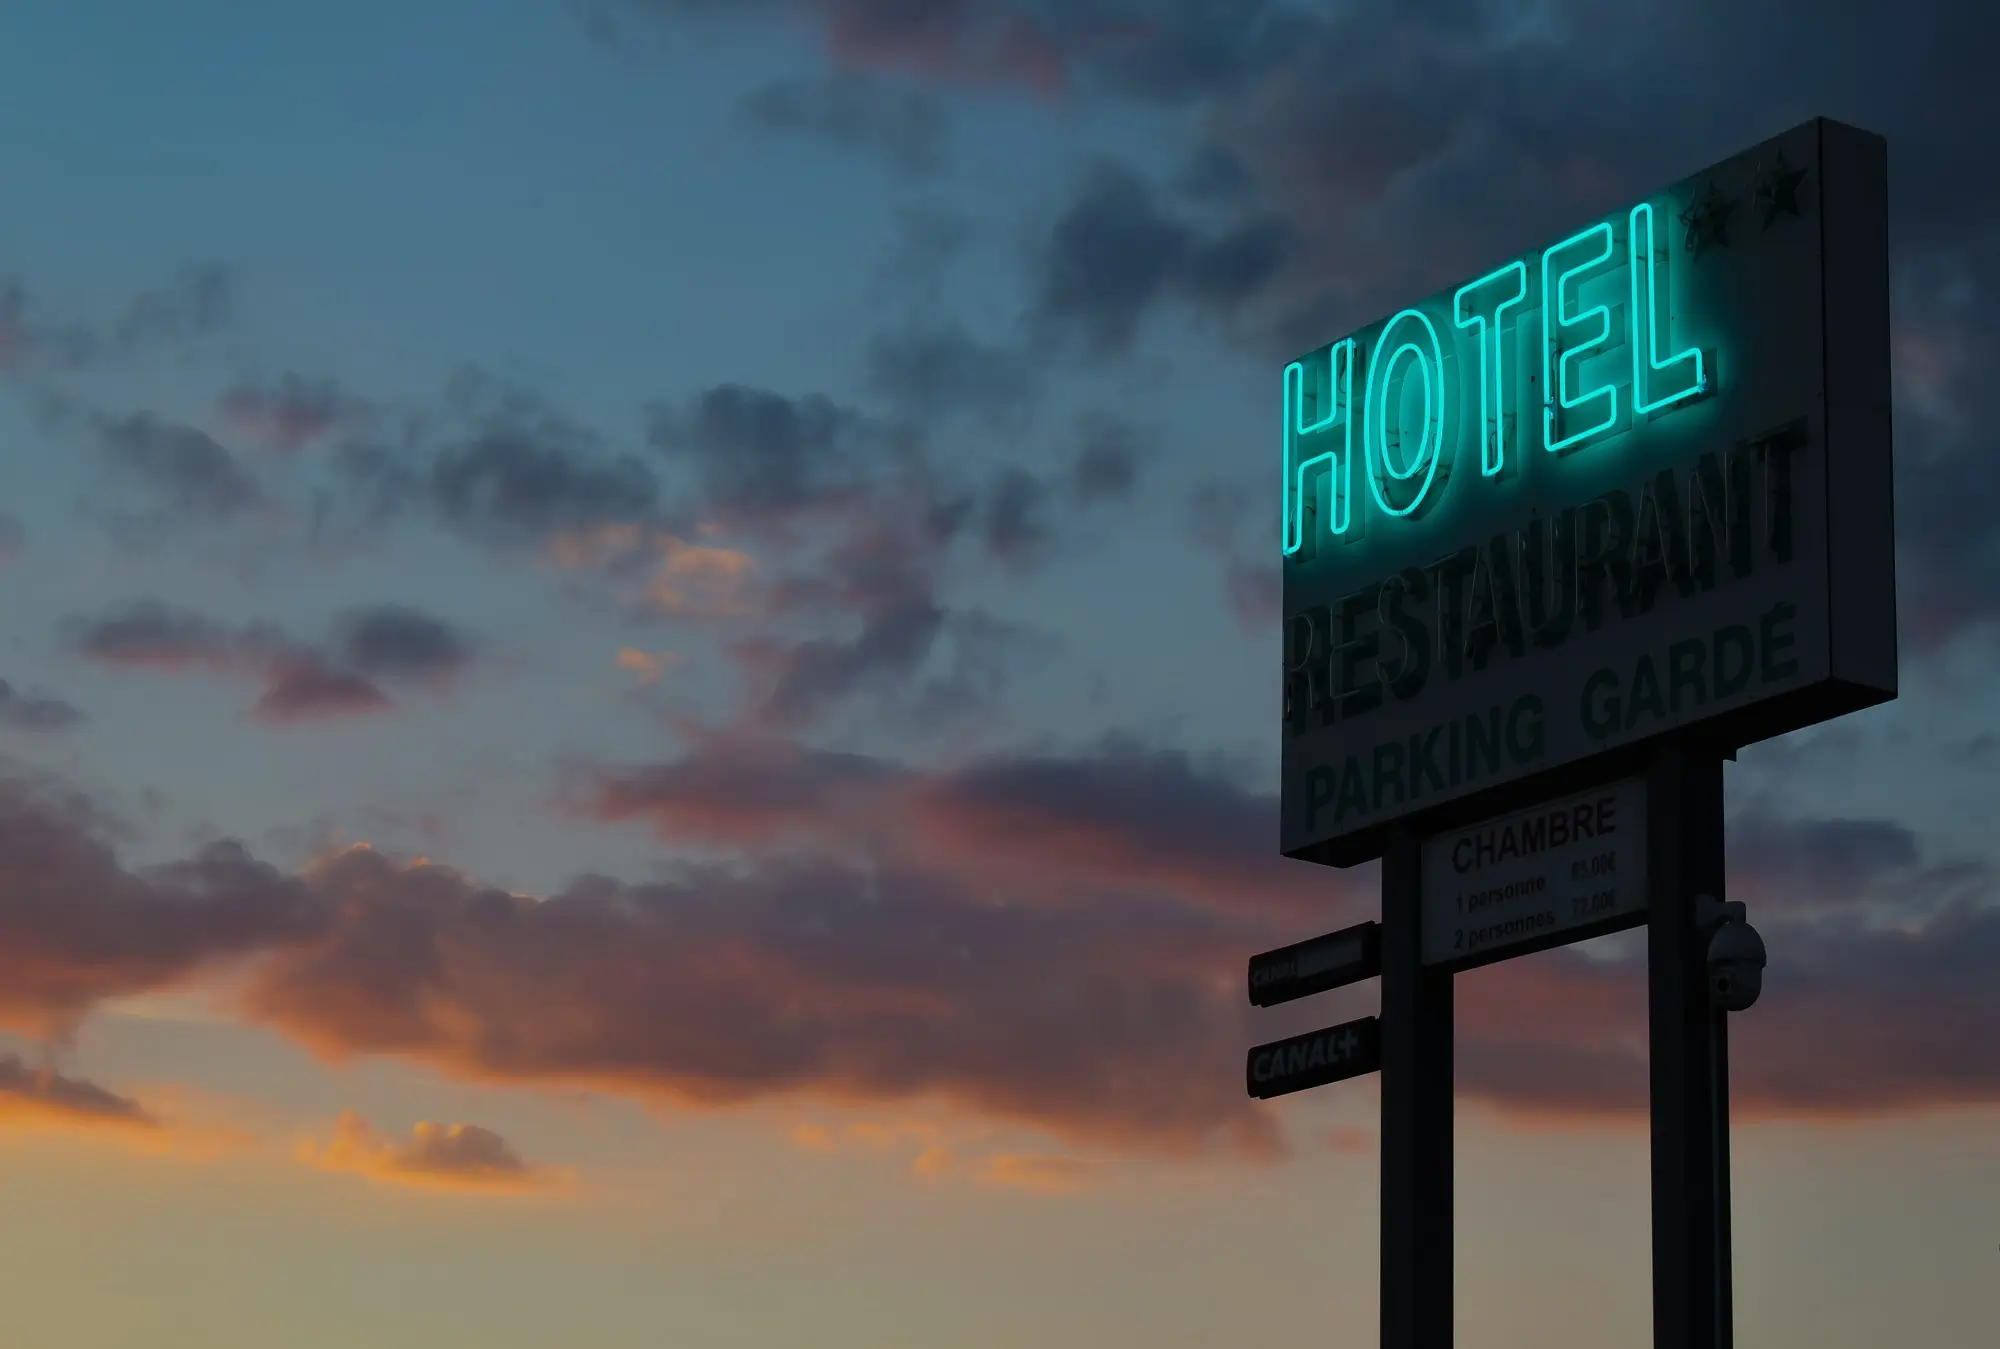 A hotel signage lights in an early evening.